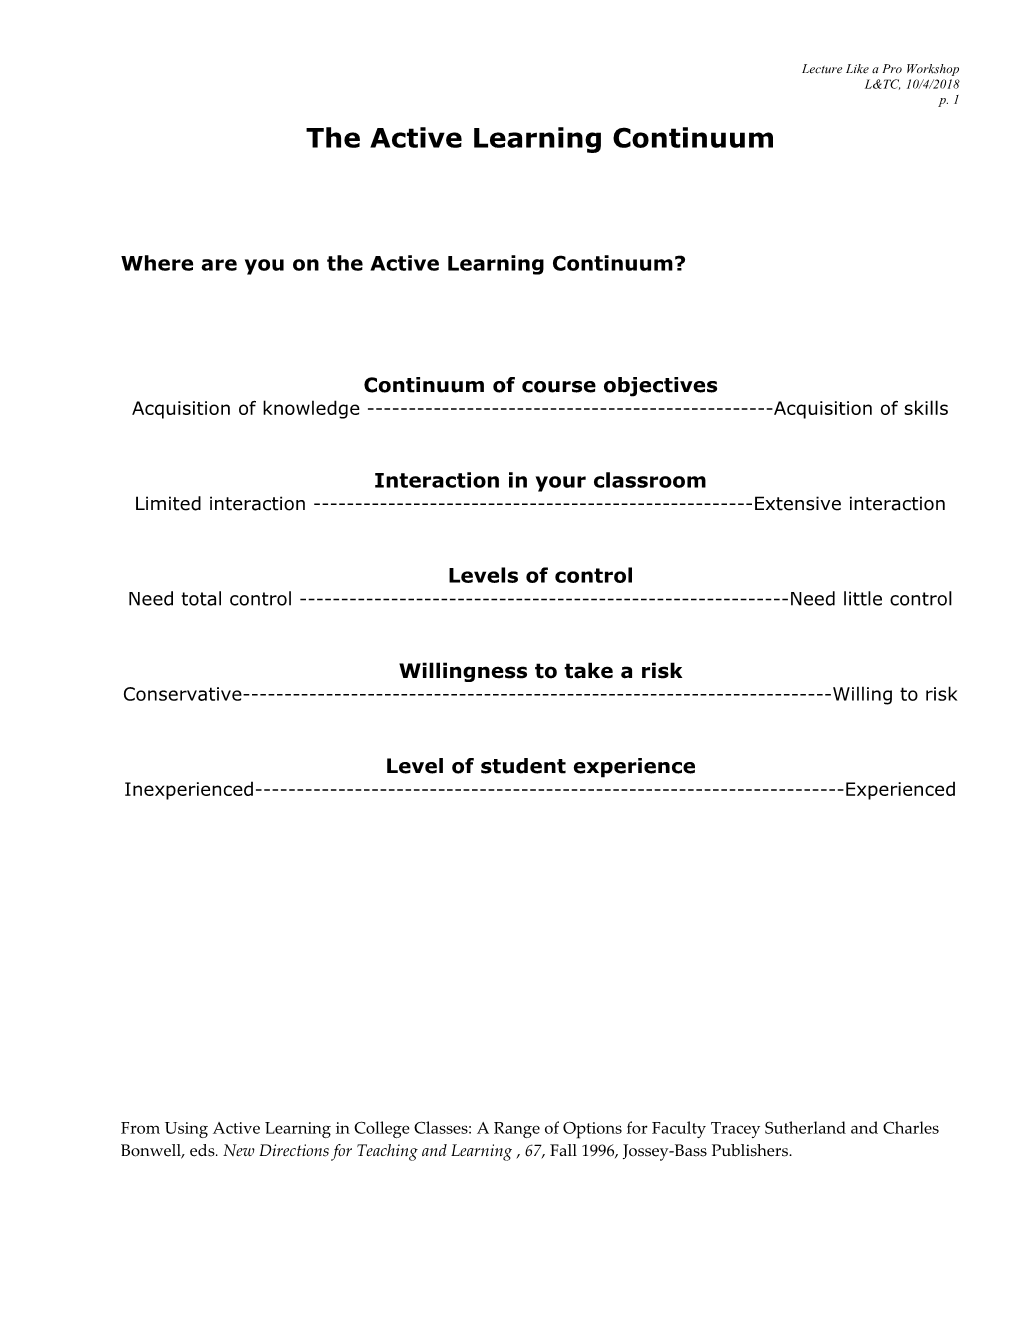 The Active Learning Continuum